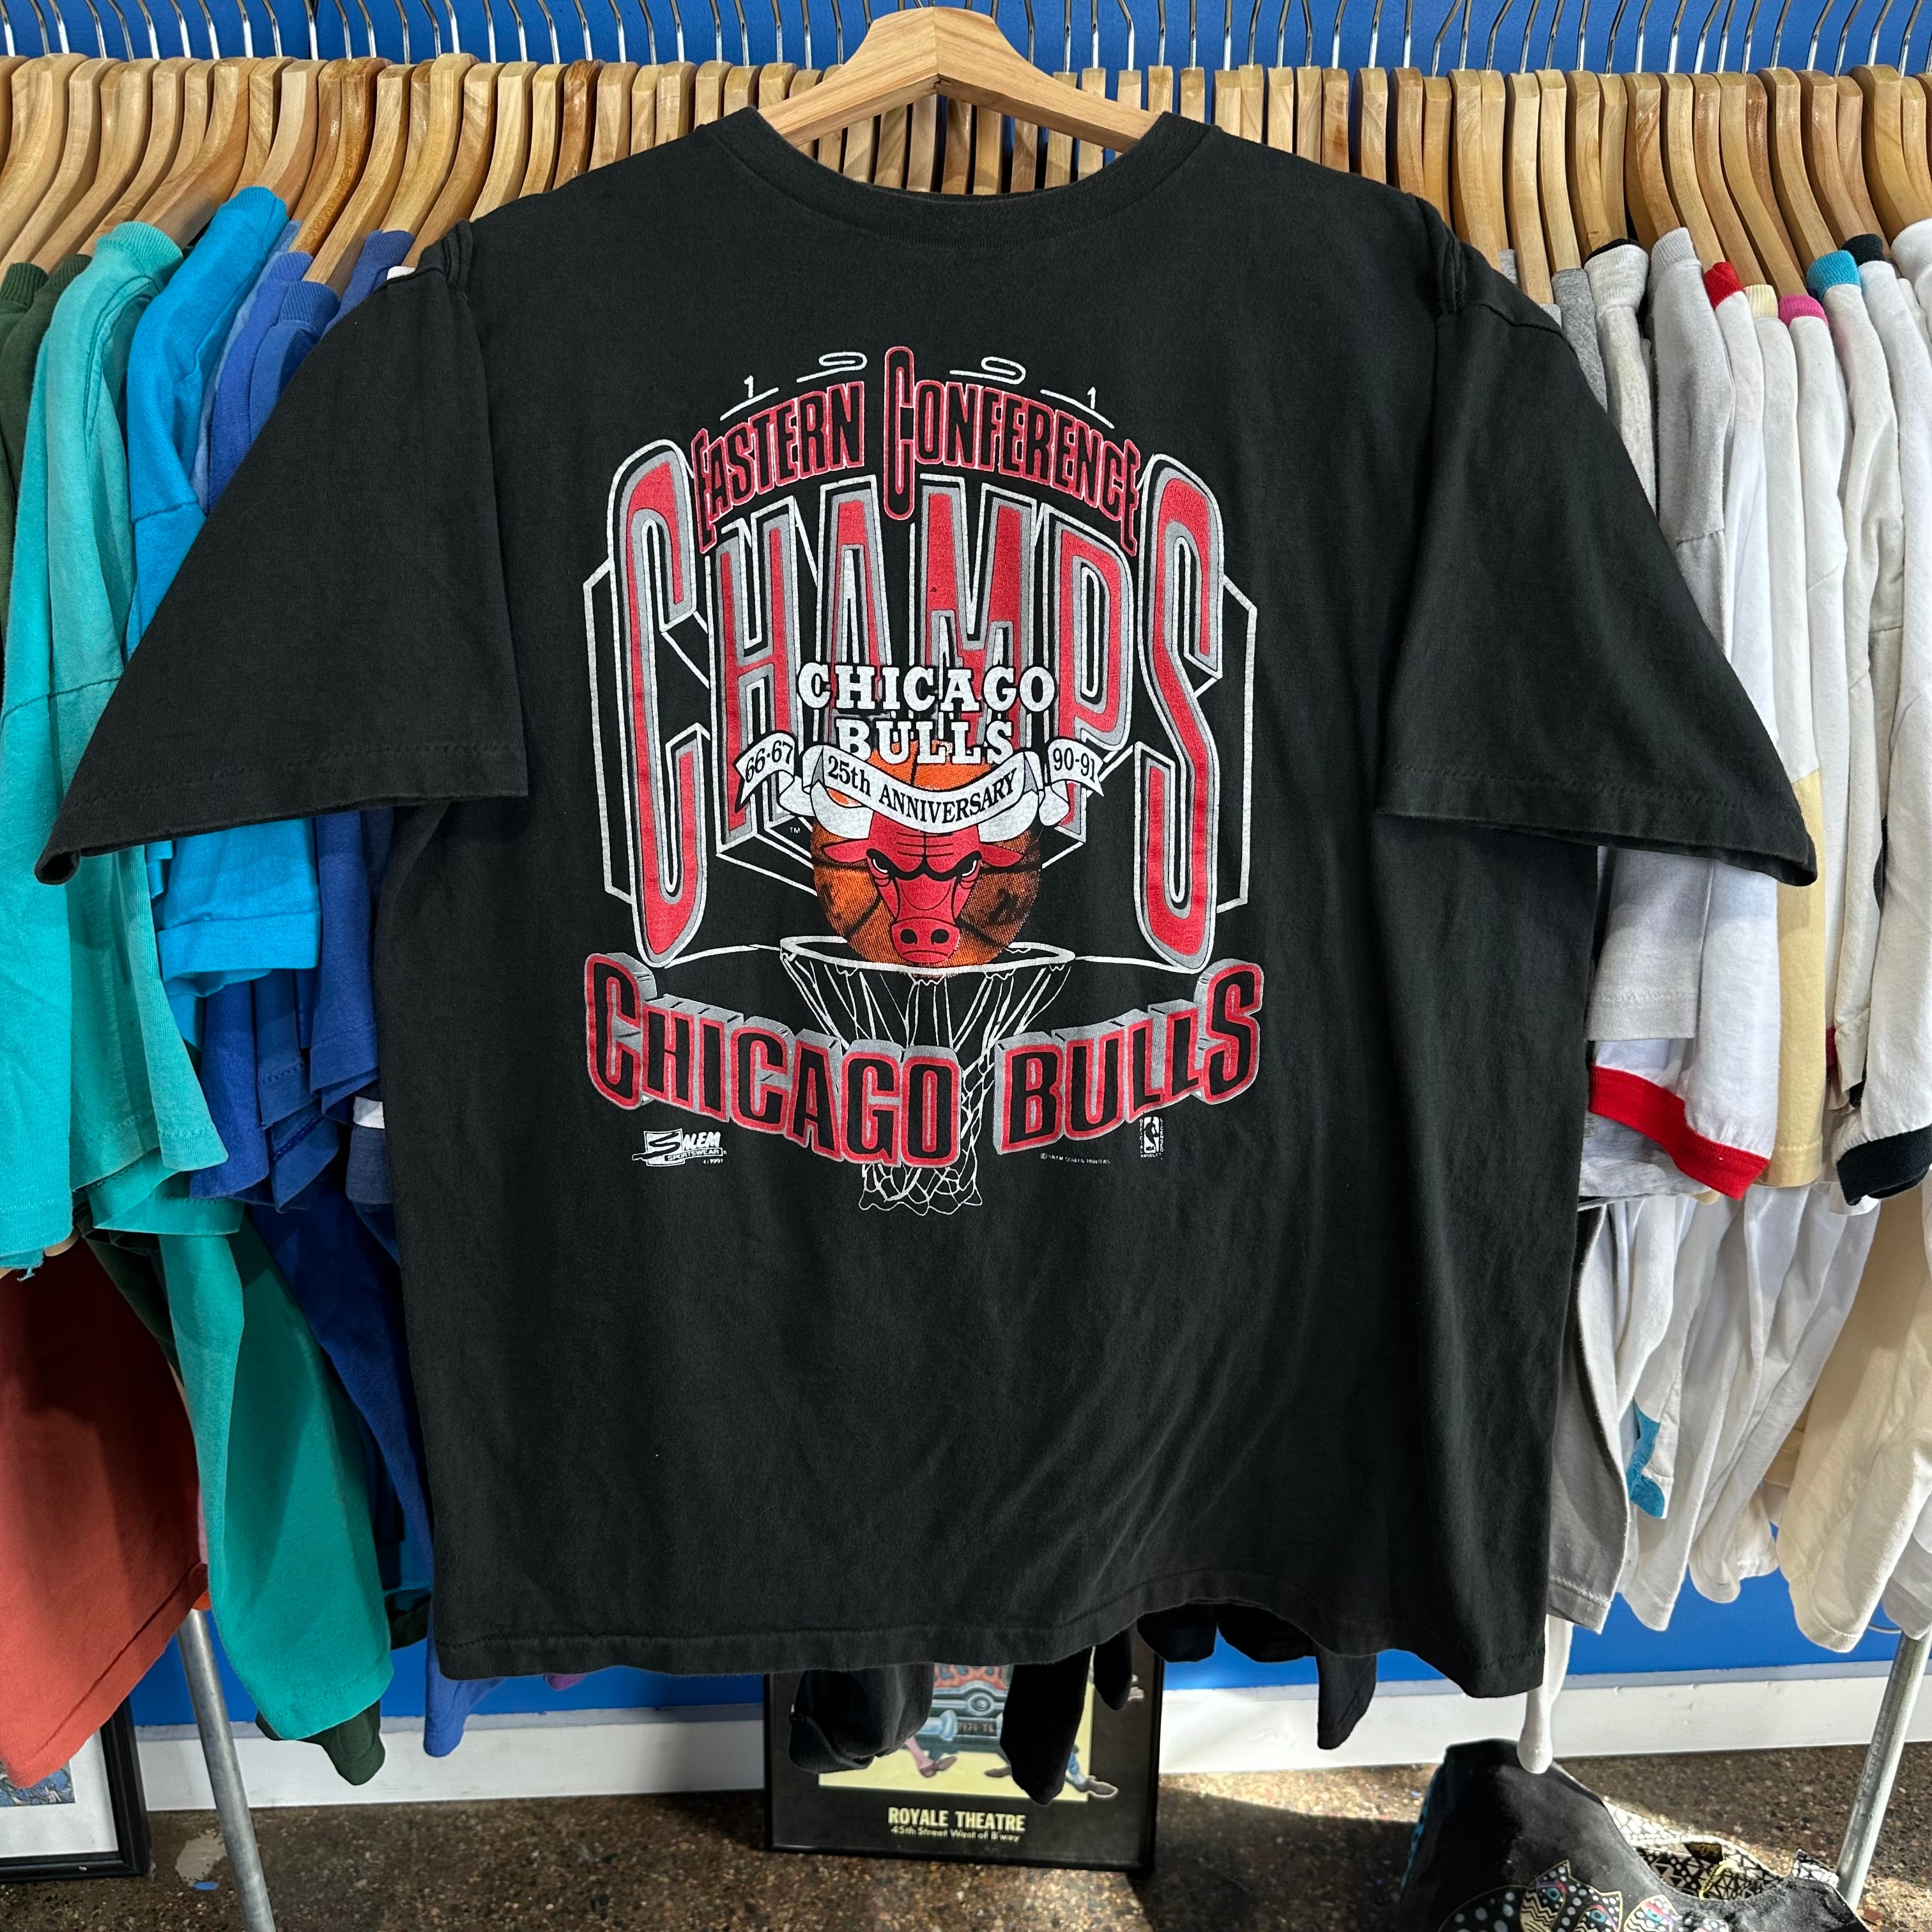 Chicago Bulls 1991 Eastern Conference Champs T-Shirt